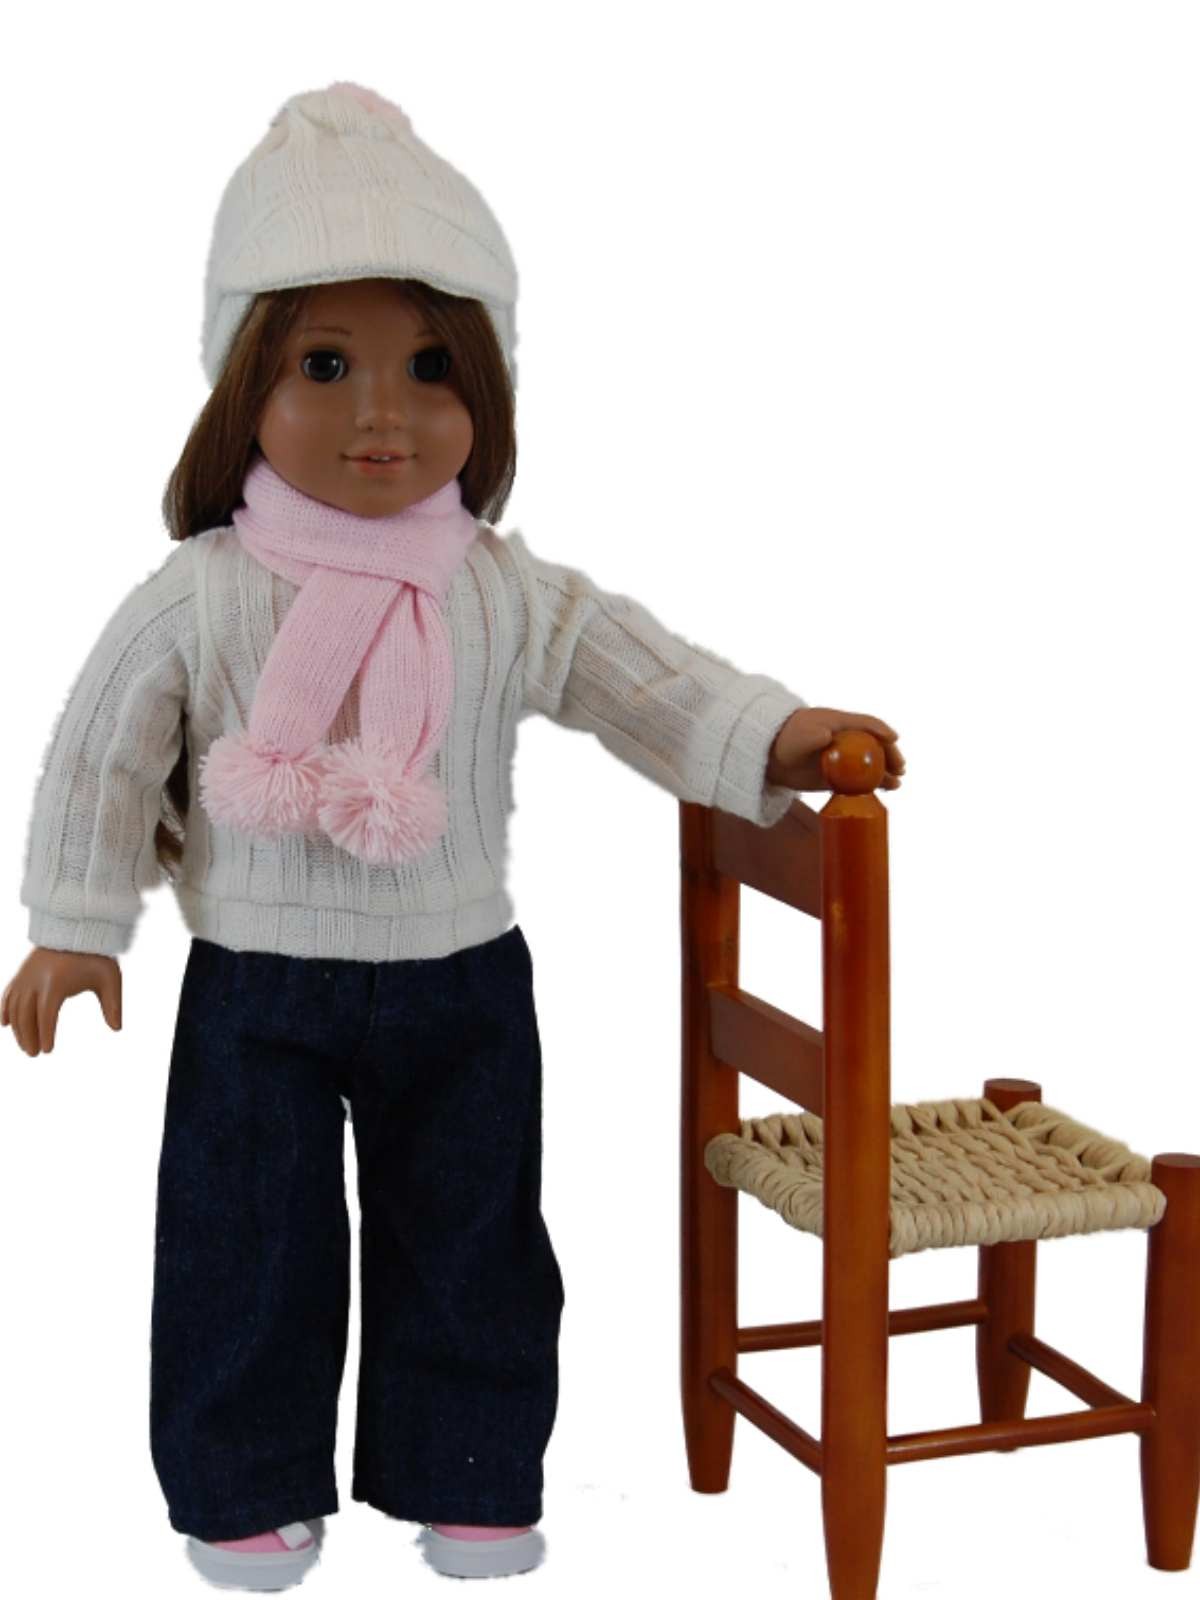 0898100000767 - DENIM JEAN SET, CREAM SWEATER, PINK SCARF, CAP FITS 18 AMERICAN GIRL® DOLL CLOTHES & ACCESSORIES